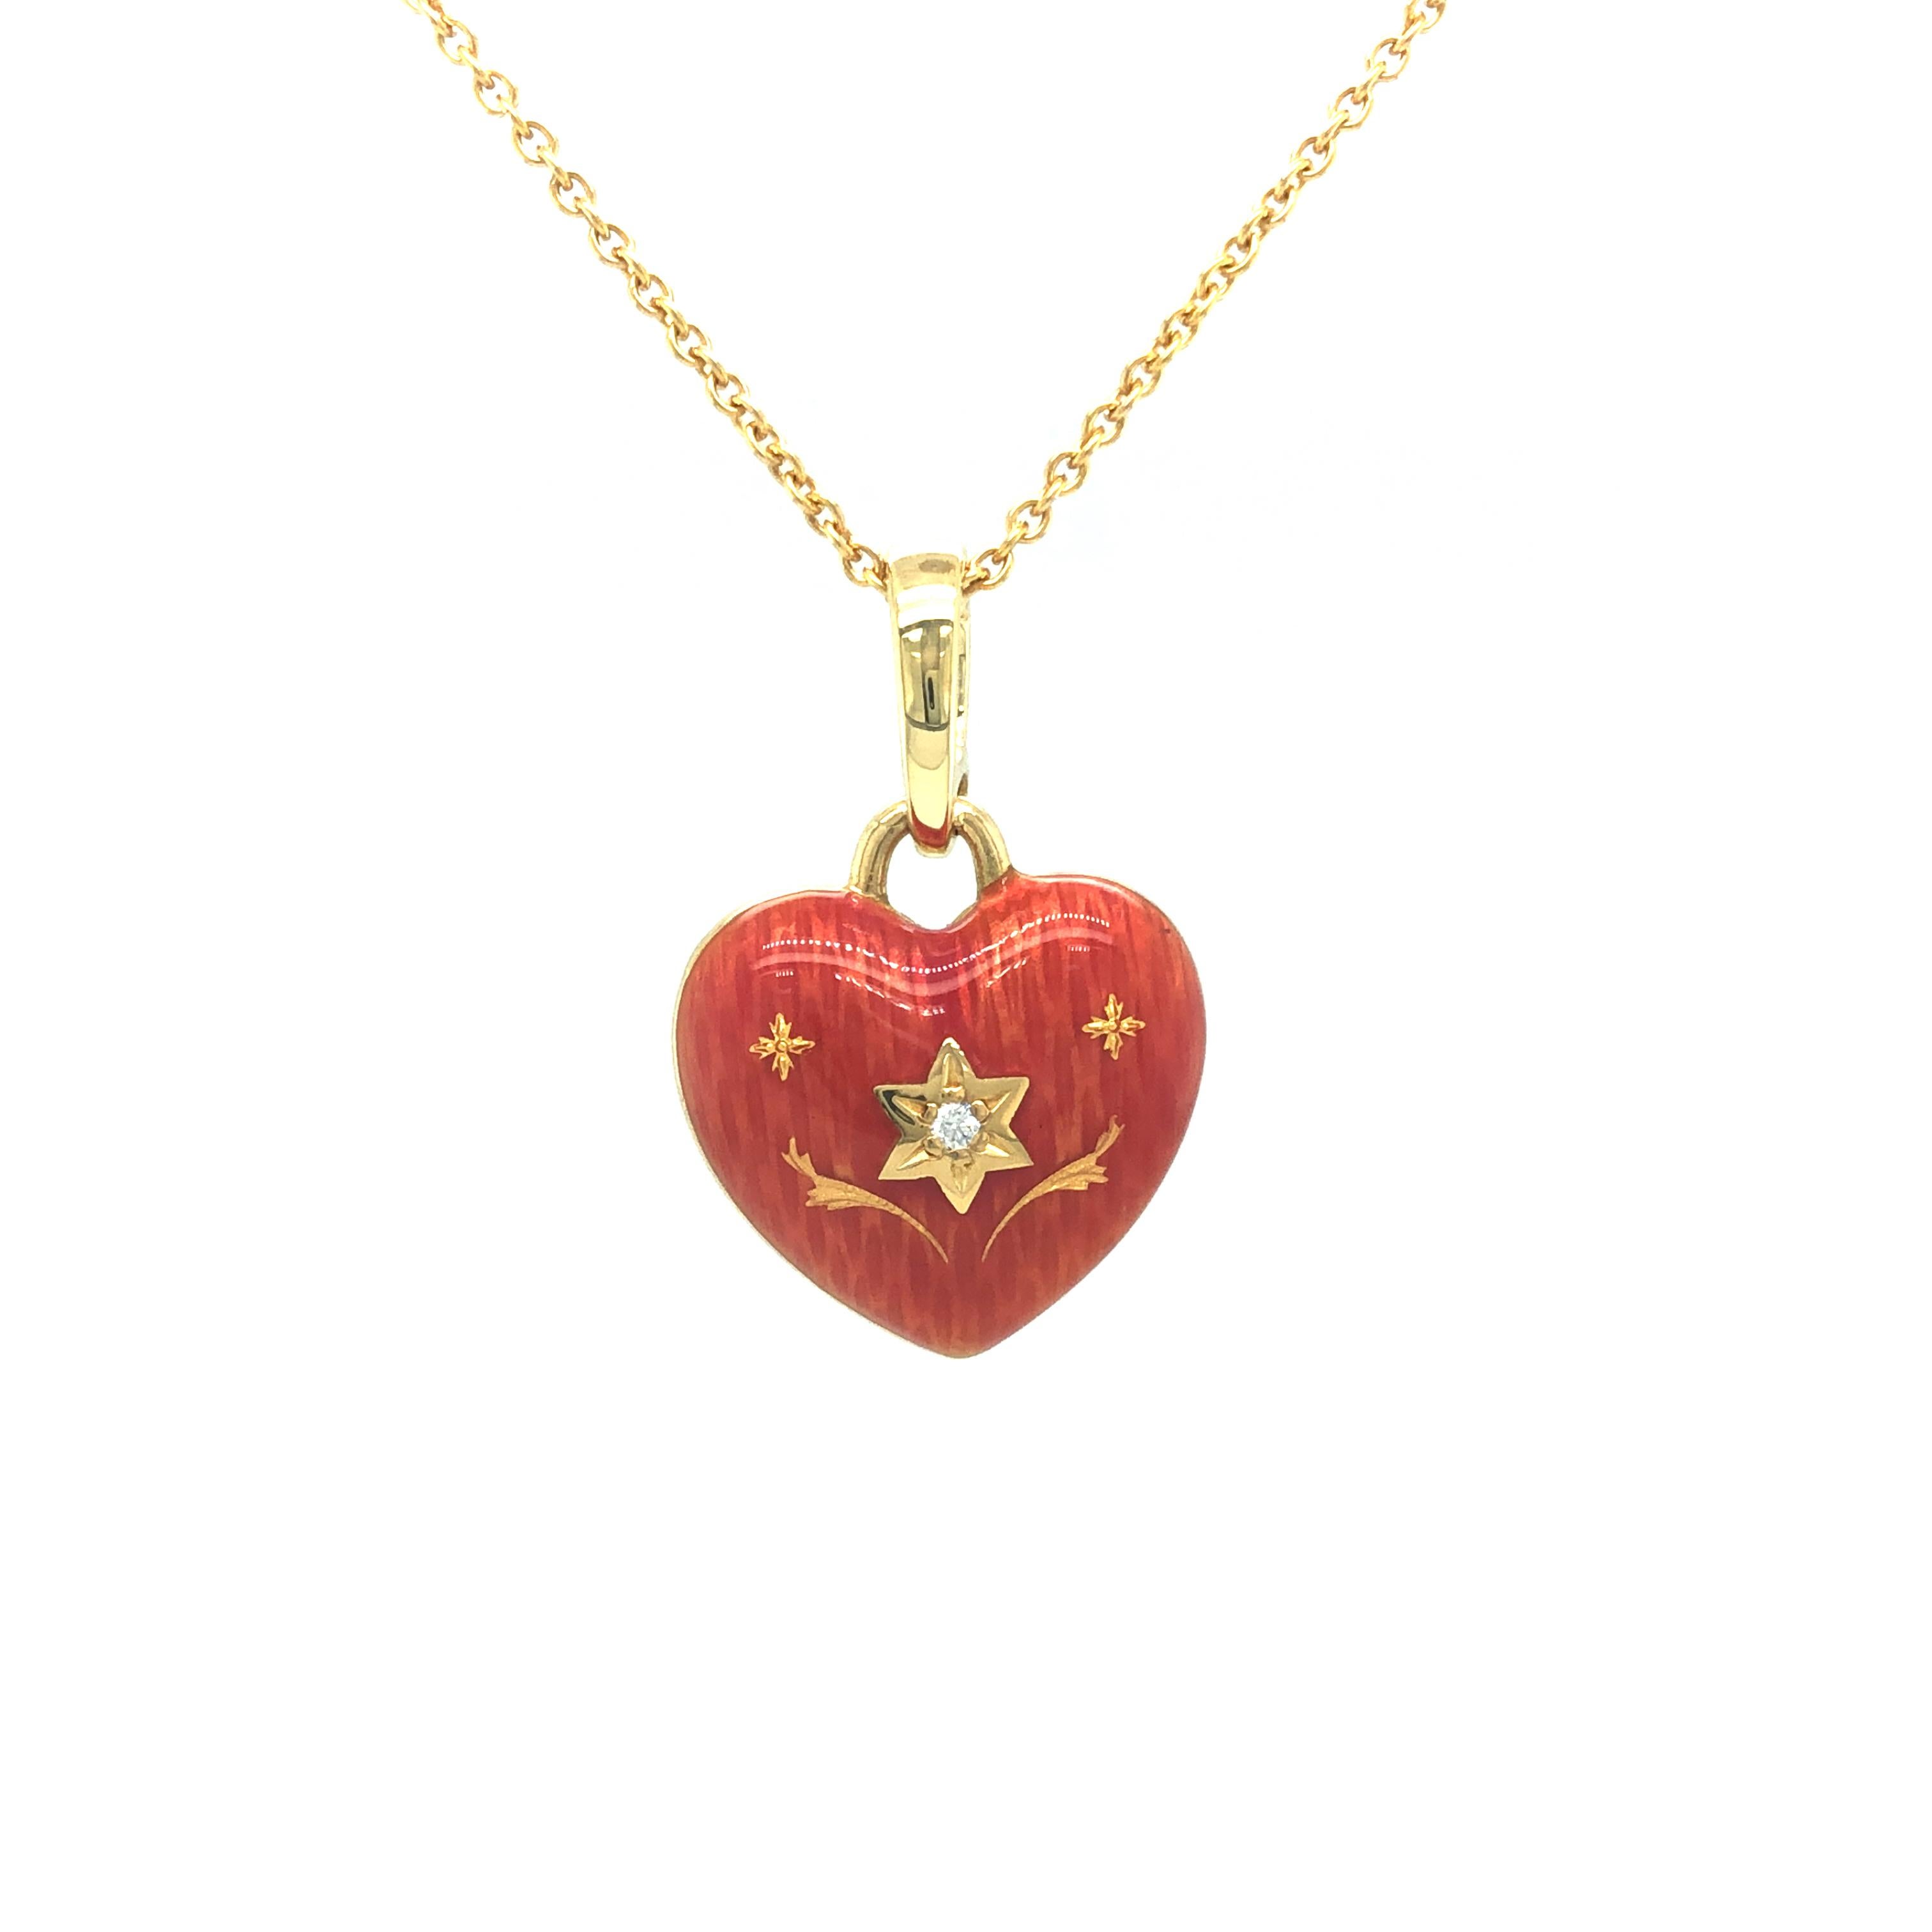 Fabergé heart pendant, 18k yellow gold,  pink translucent enamel with four so-called paillons, 1 brilliant cut diamond 0.015 ct G VS

Reference: F1717/J1/00/00/102
Brand: Faberge
Workmaster: Victor Mayer
Material: 750/- yellow gold (18k)
Shape: